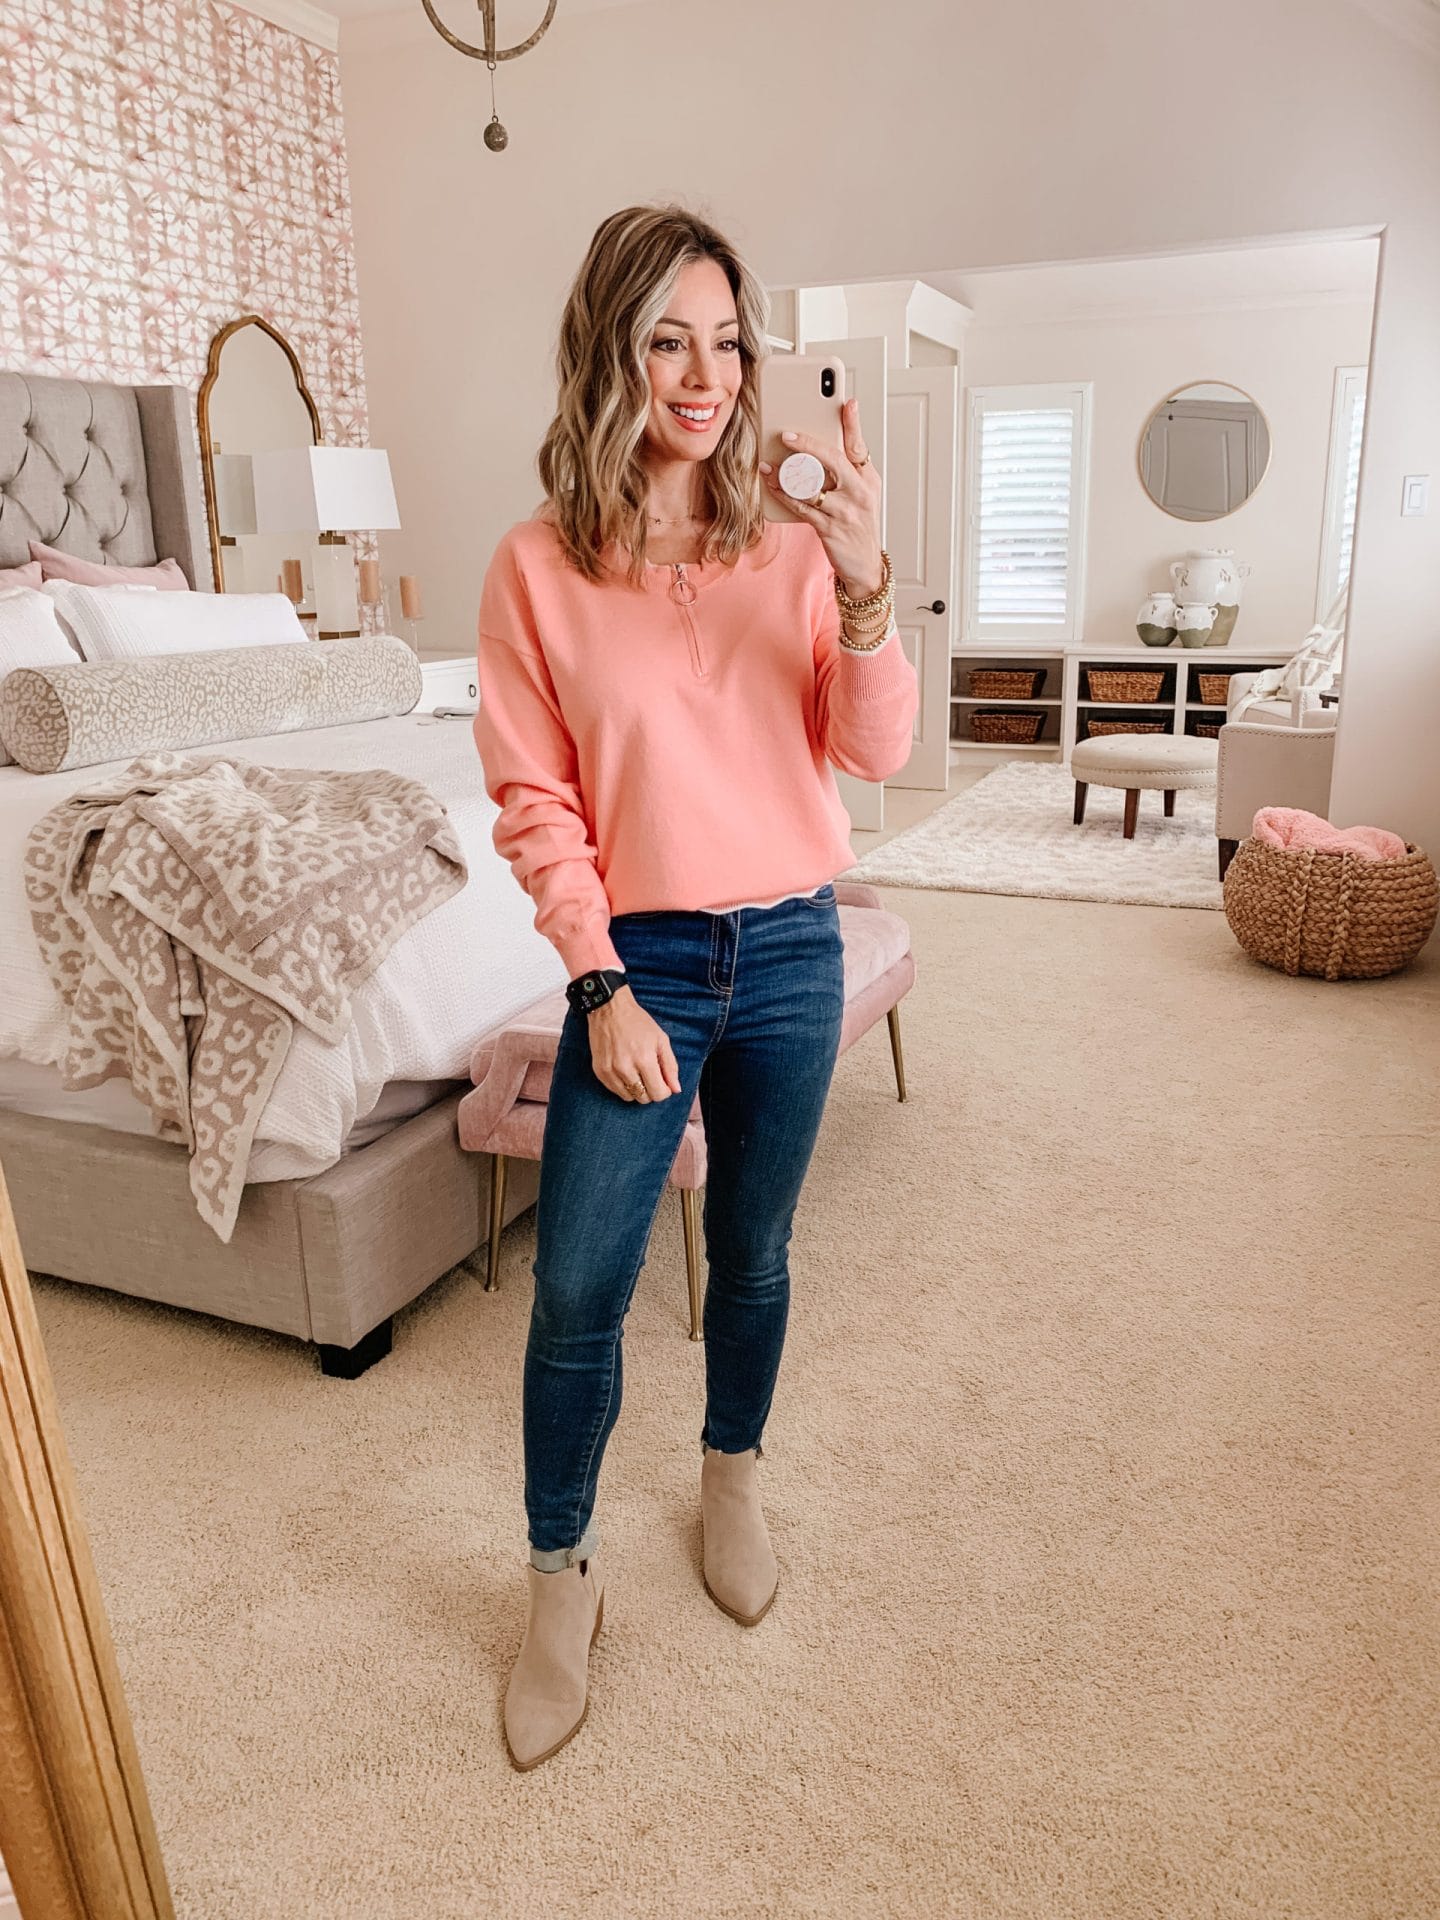 Amazon Fashion, Scalloped Sweater, Jeans, Booties 